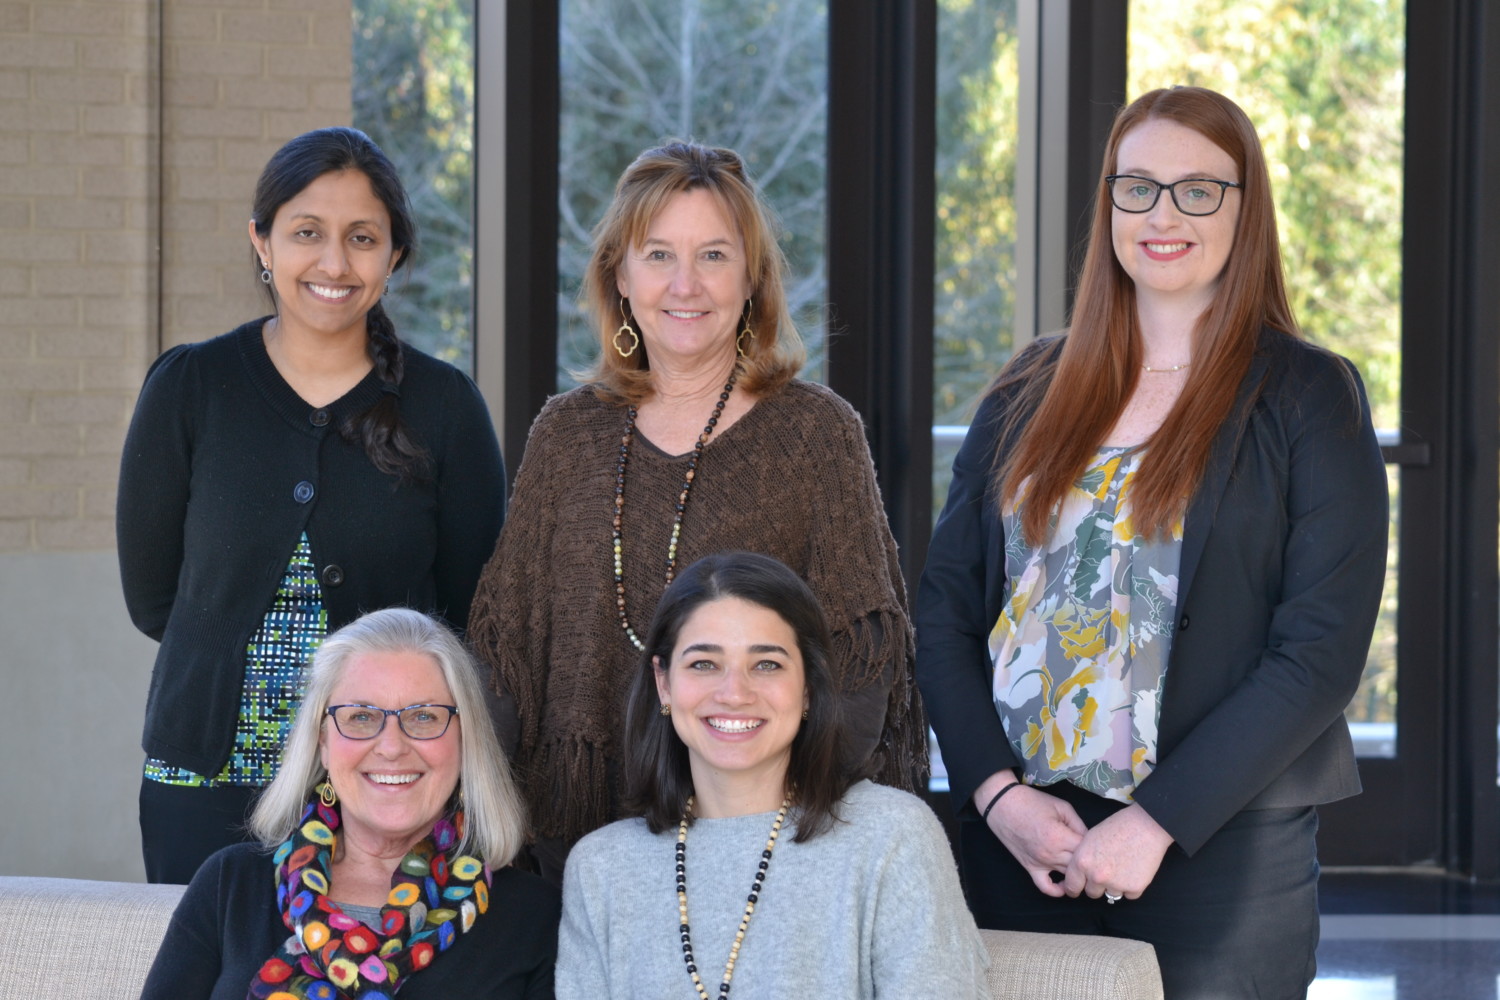 The research team consists of (from L-R) Prerana Roth, Lauren Demosthenes, Kaileigh Byrne, (front row) Tricia Lawdahl and Katy Dumas.